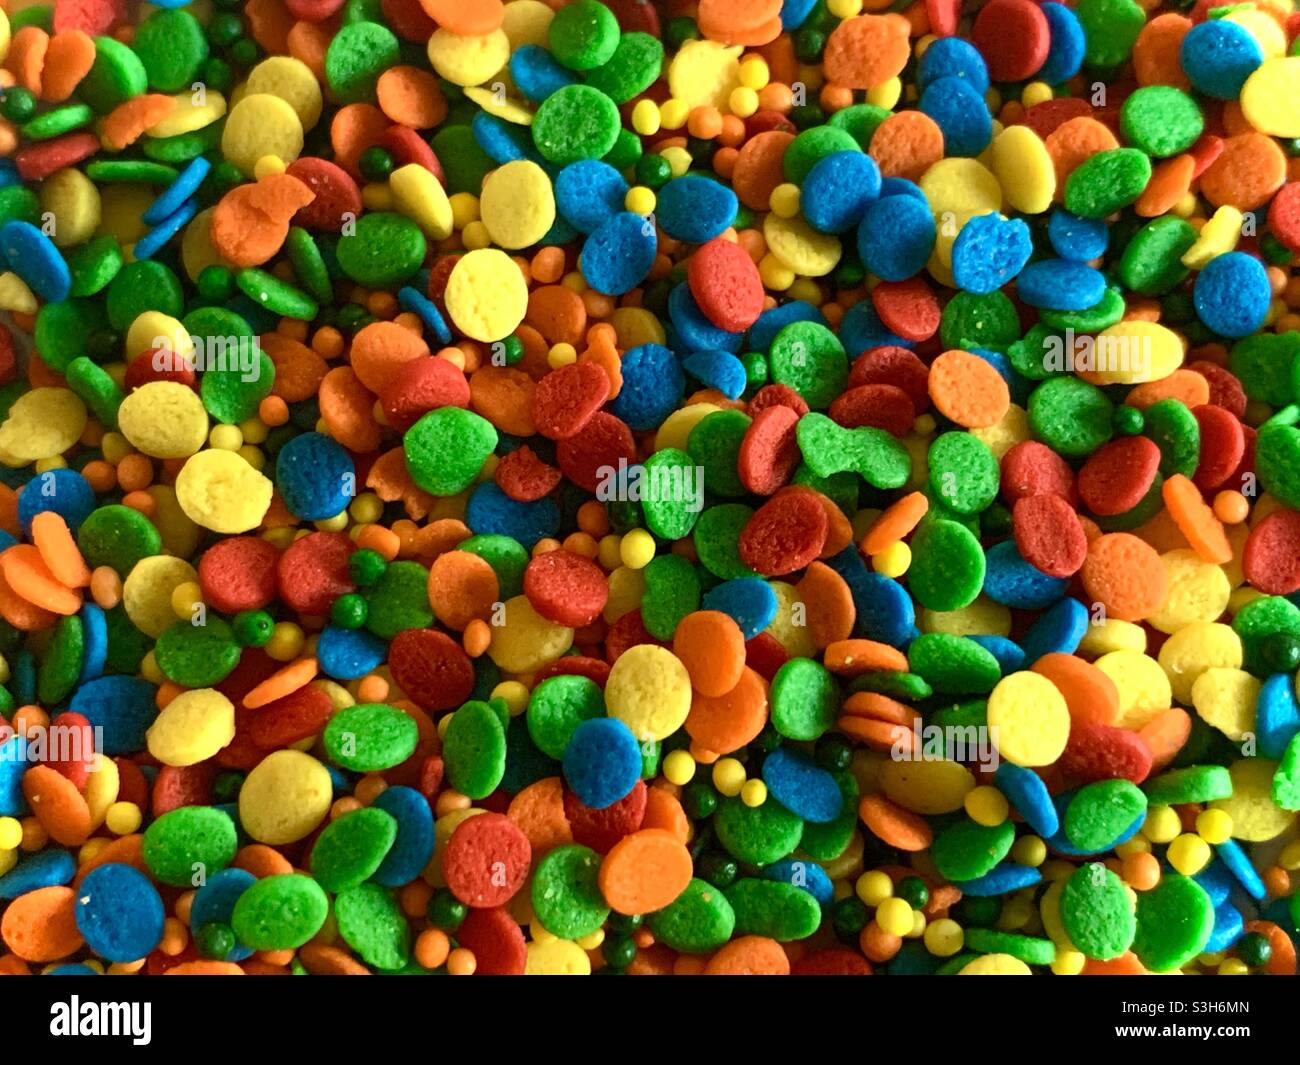 Candies - colorful candy Sprinkles - rainbow colored sprinkles up close Stock Photo